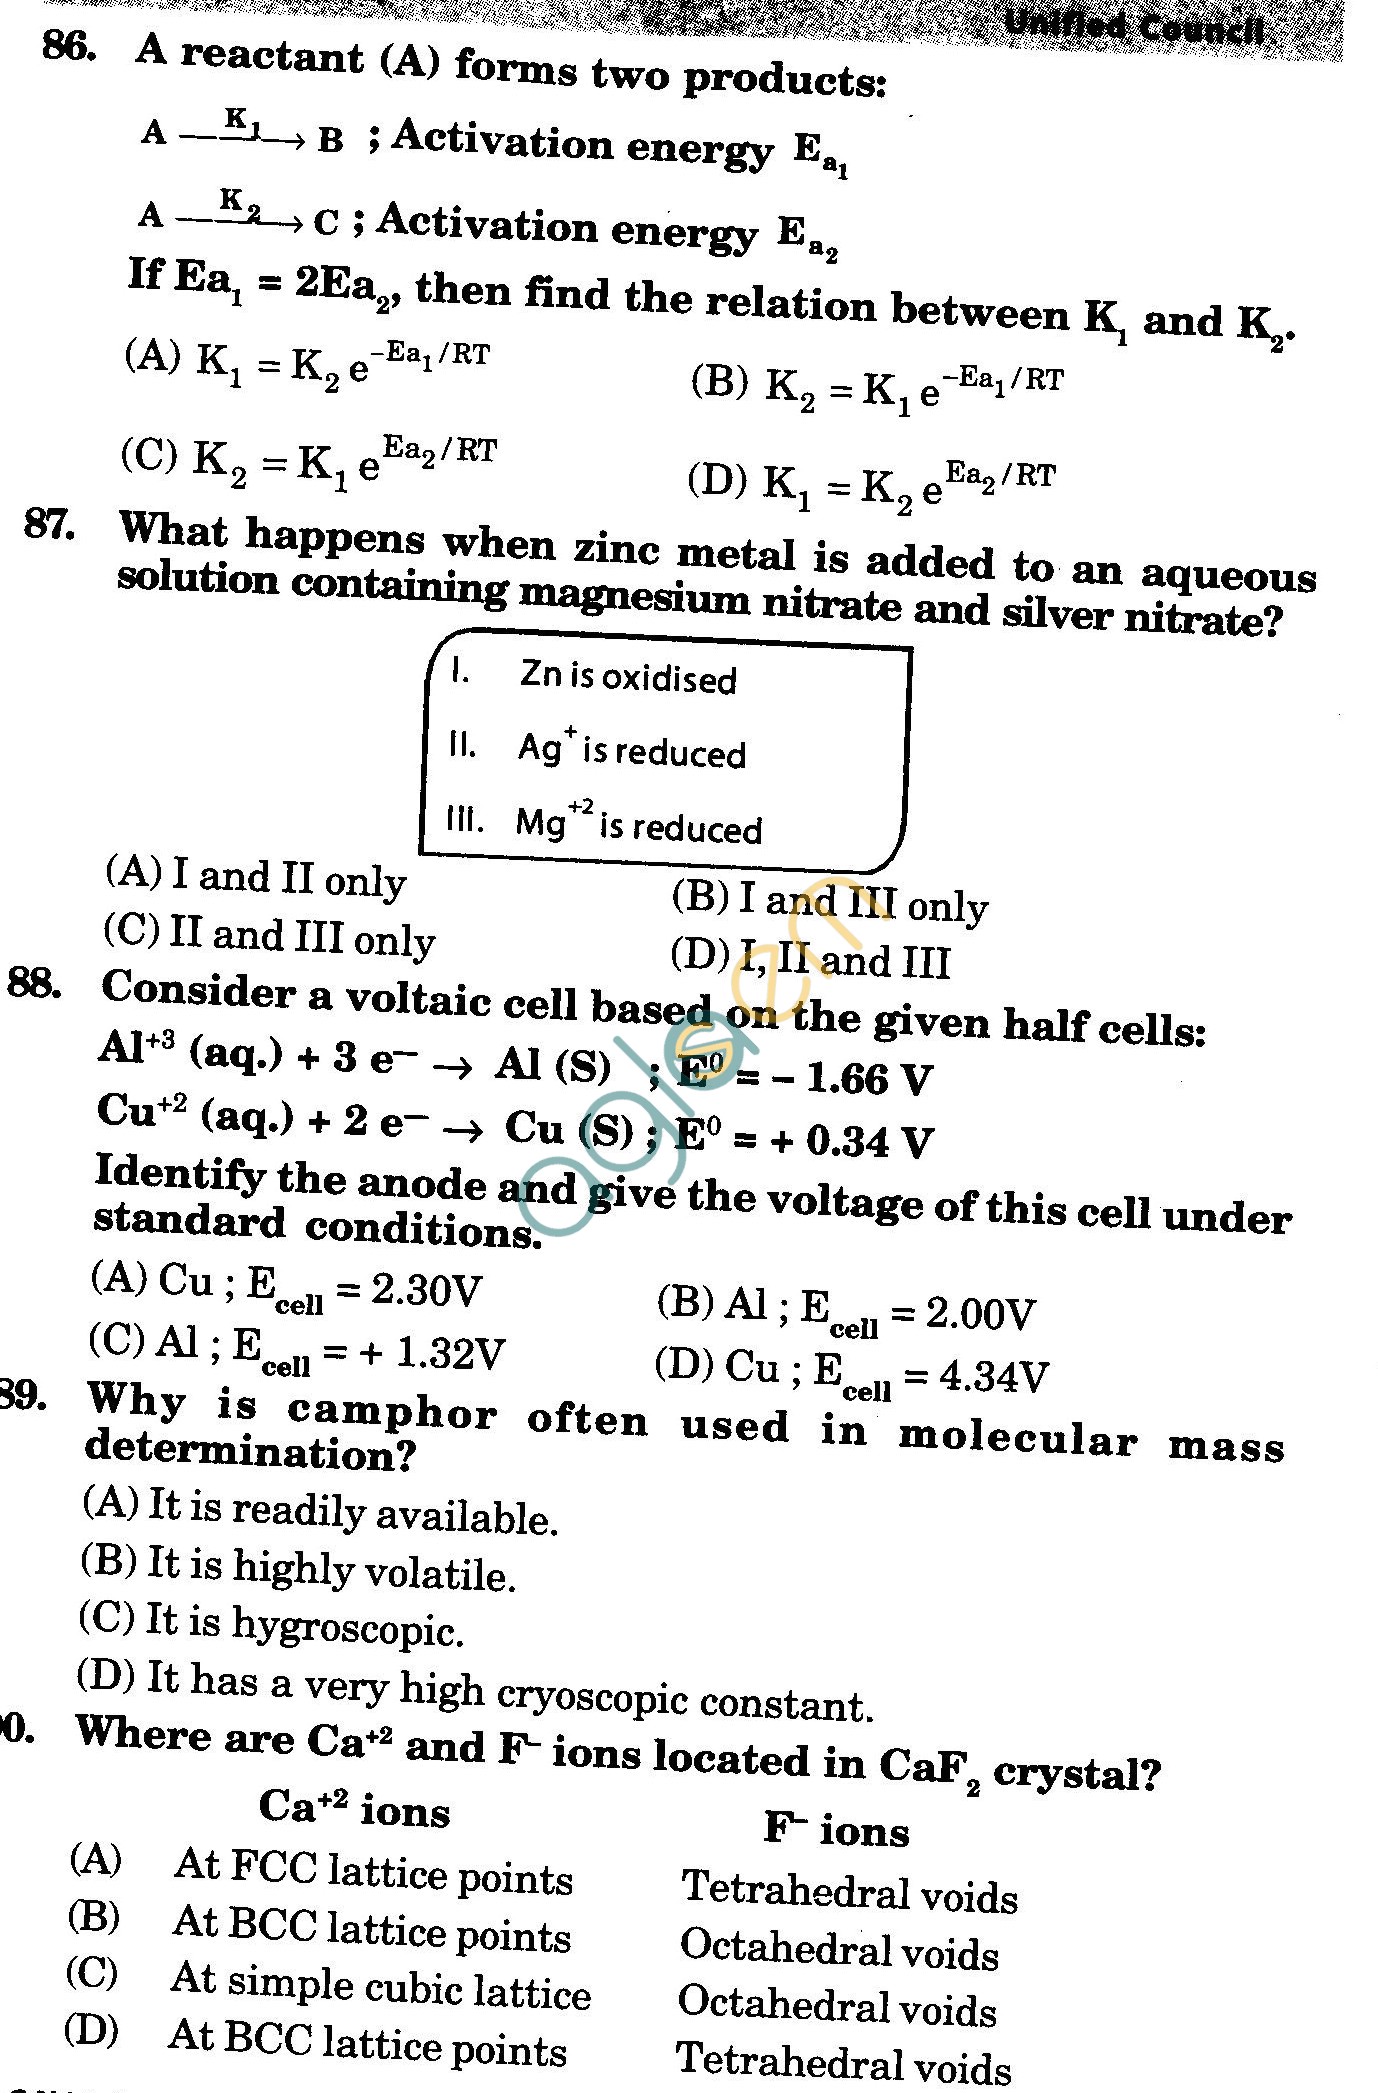 NSTSE 2010 Class XII PCM Question Paper with Answers - Chemistry